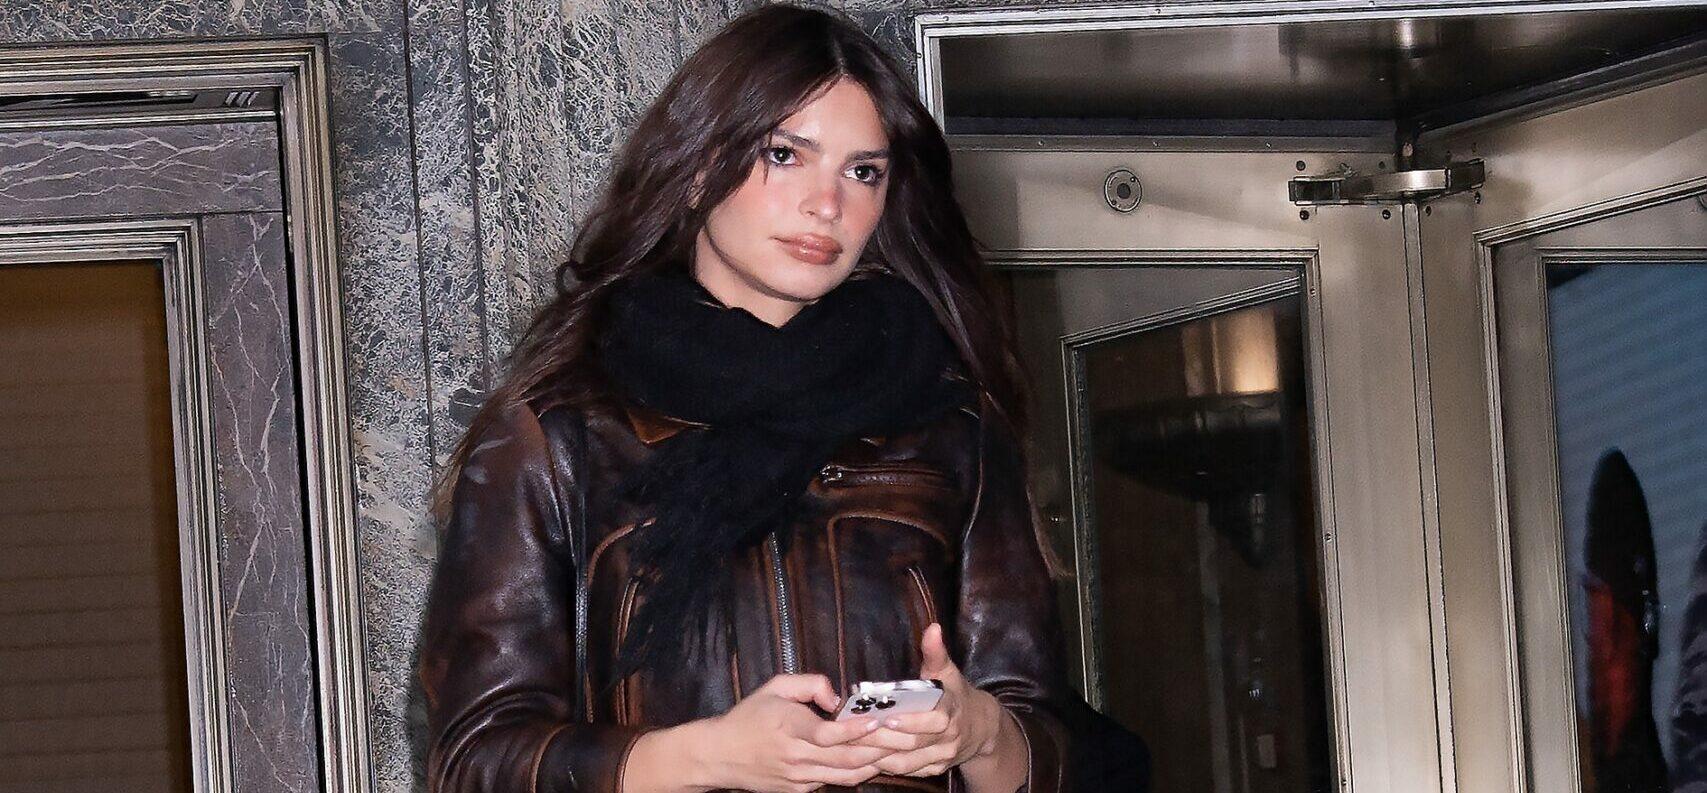 Emily Ratajkowski is seen out and about in NYC